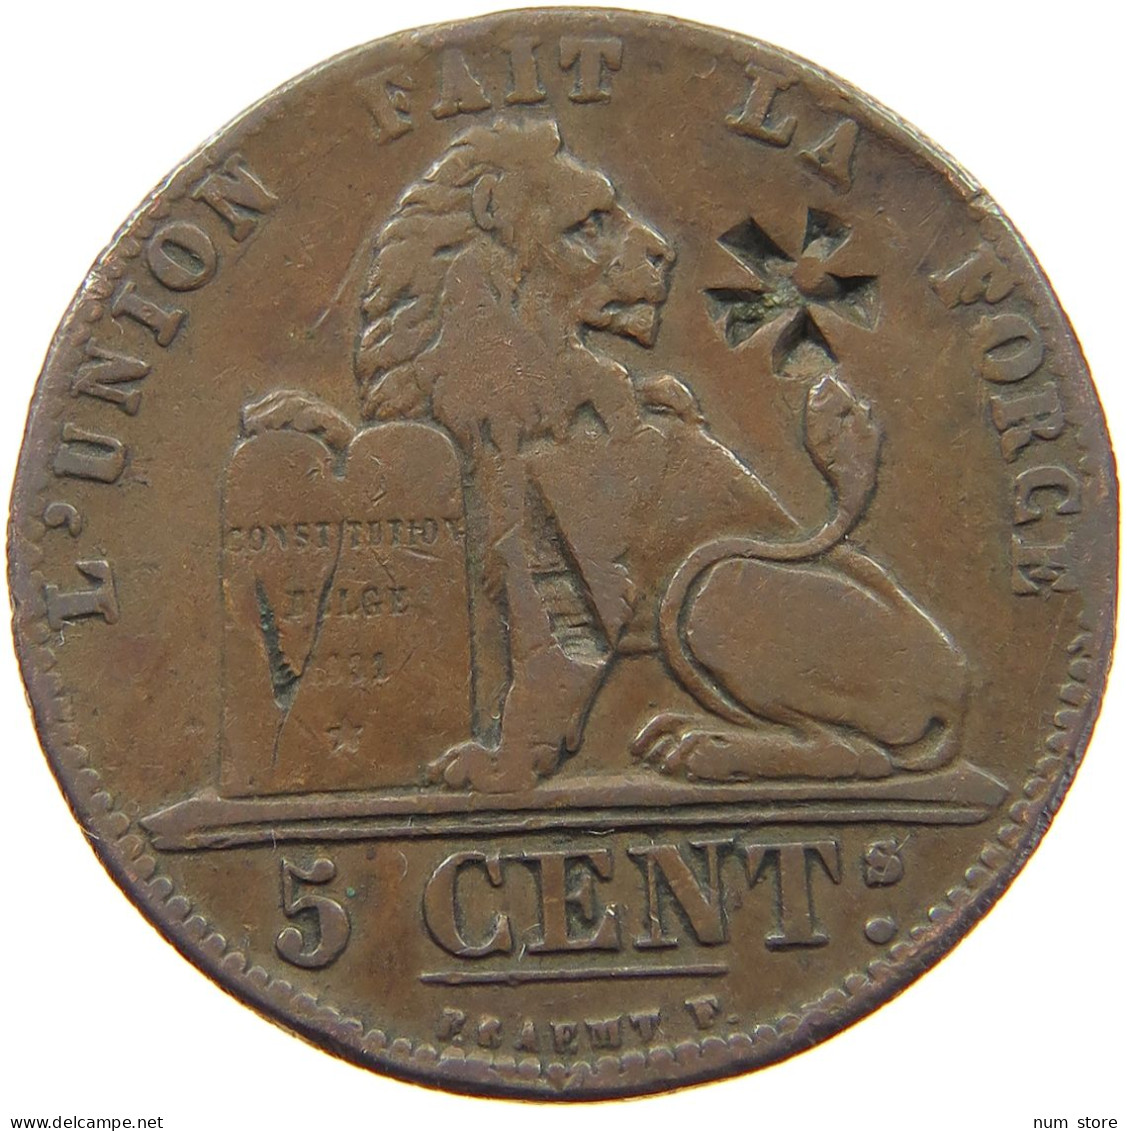 BELGIUM 5 CENTIMES 1847 5 CENTIMES 1847 COUNTERMARKED #t132 0585 - 5 Cents